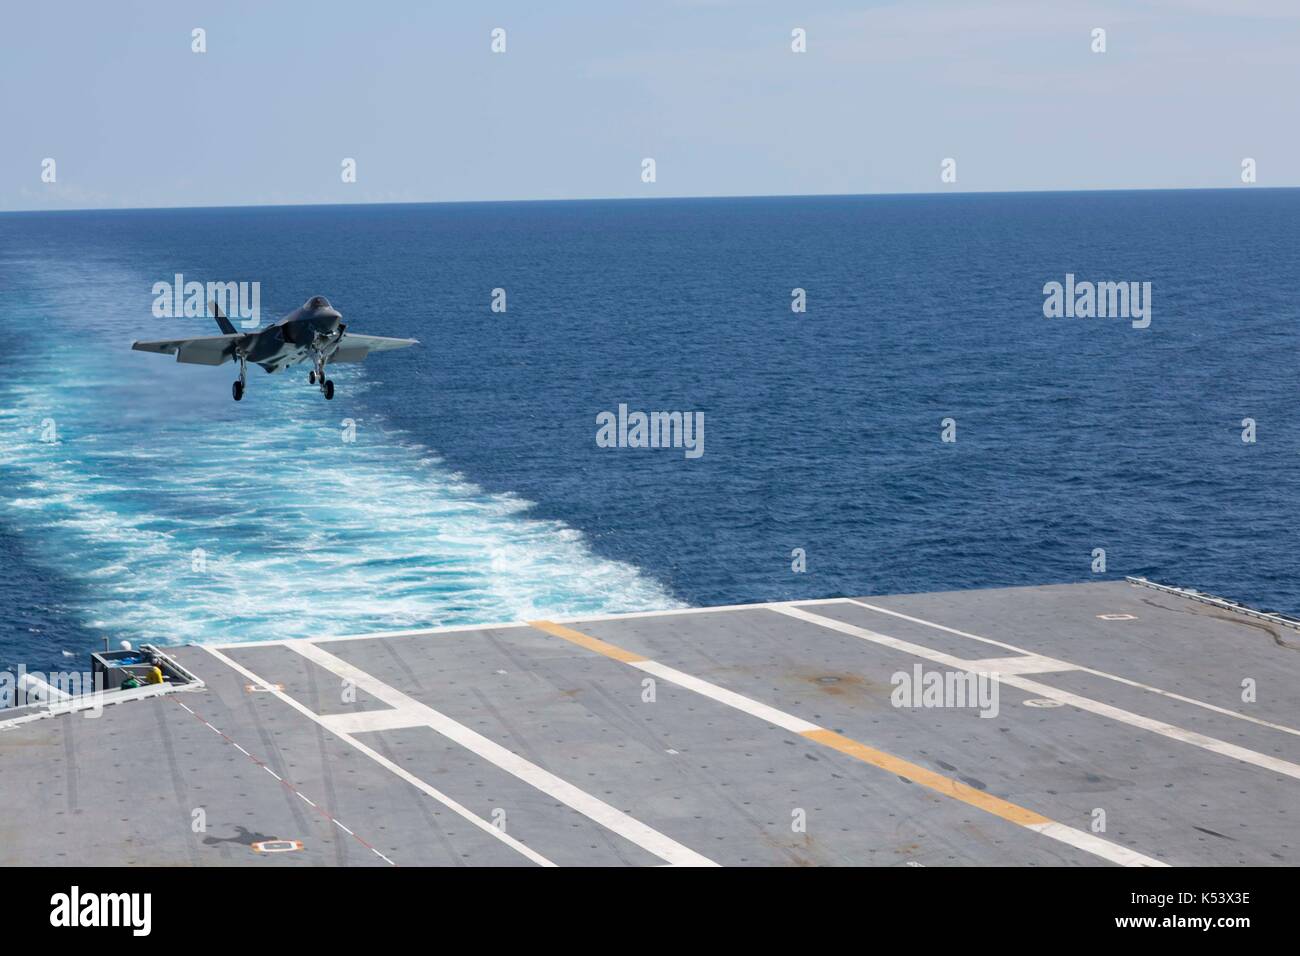 170904-N-AD724-0028 (ATLANTIC OCEAN) September 4, 2017 – An F-35C Lightning II, from the “Grim Reapers” of Strike Fighter Squadron 101 (VFA 101), land Stock Photo